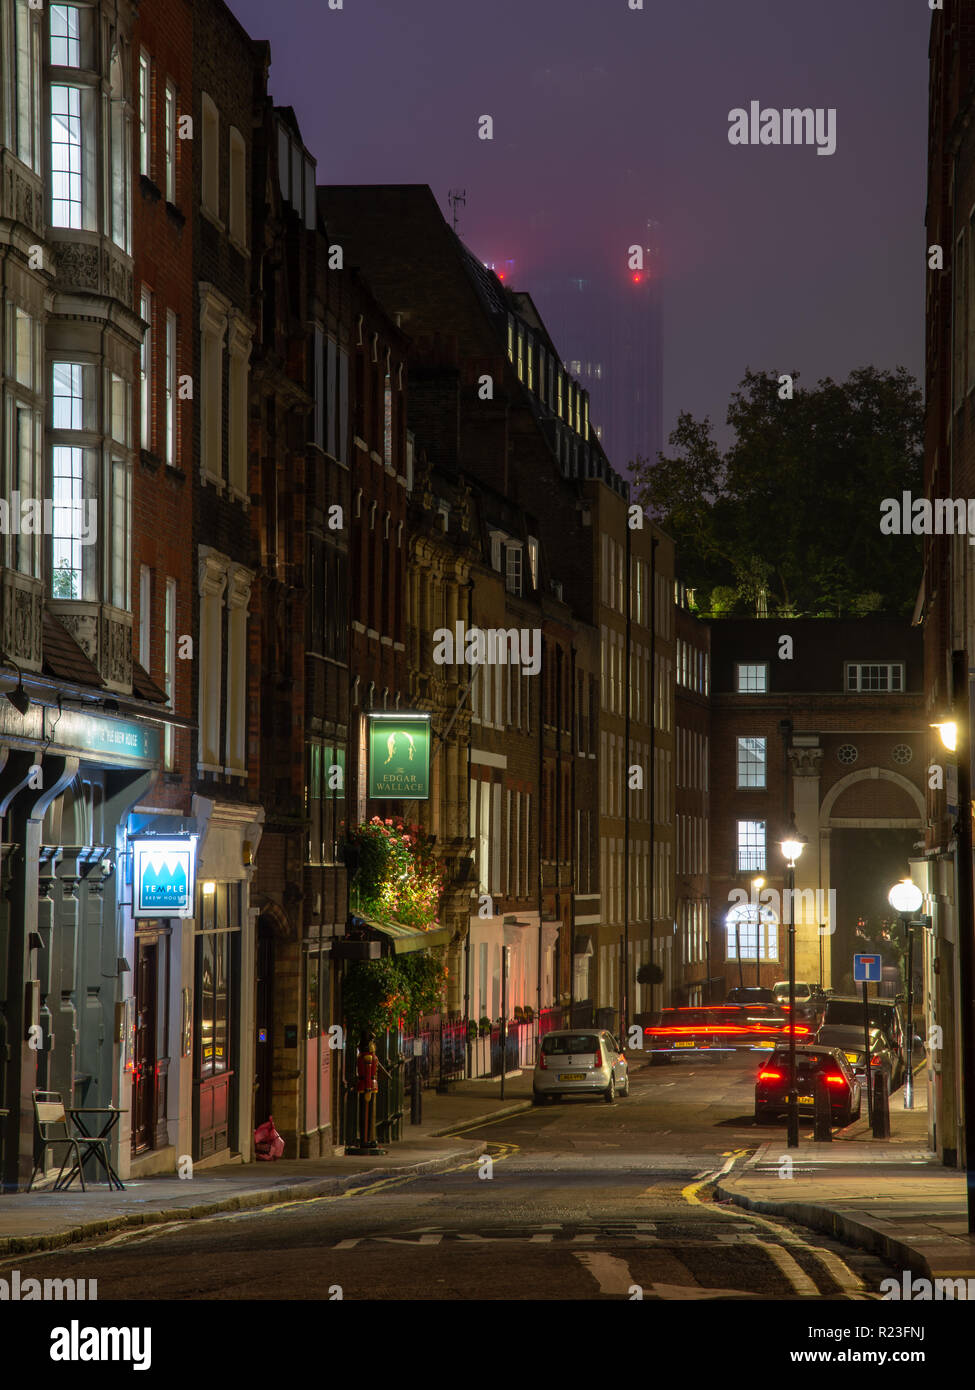 London, England, UK - October 15, 2018: Houses and pubs in London's Temple neighbourhood are lit at night, with a city skyscraper half hidden in mist  Stock Photo